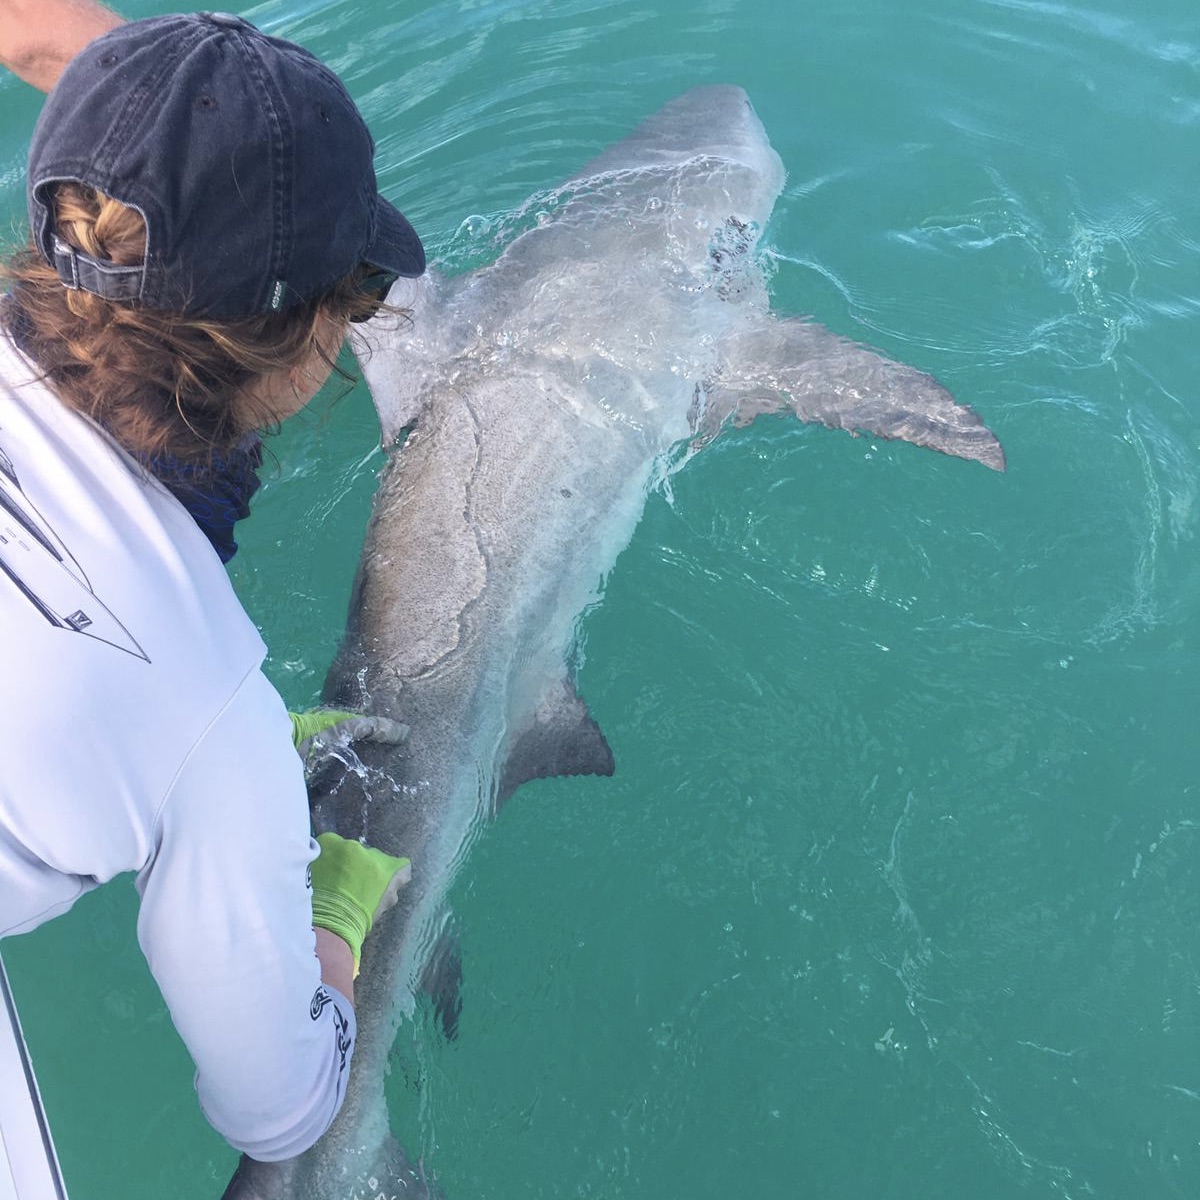 I'm releasing a bull shark after collecting fin and muscle samples in the Florida Keys. This was part of Laura García Barcia’s research to assess heavy metal pollution in coastal sharks. PC: Kirk Gastrich